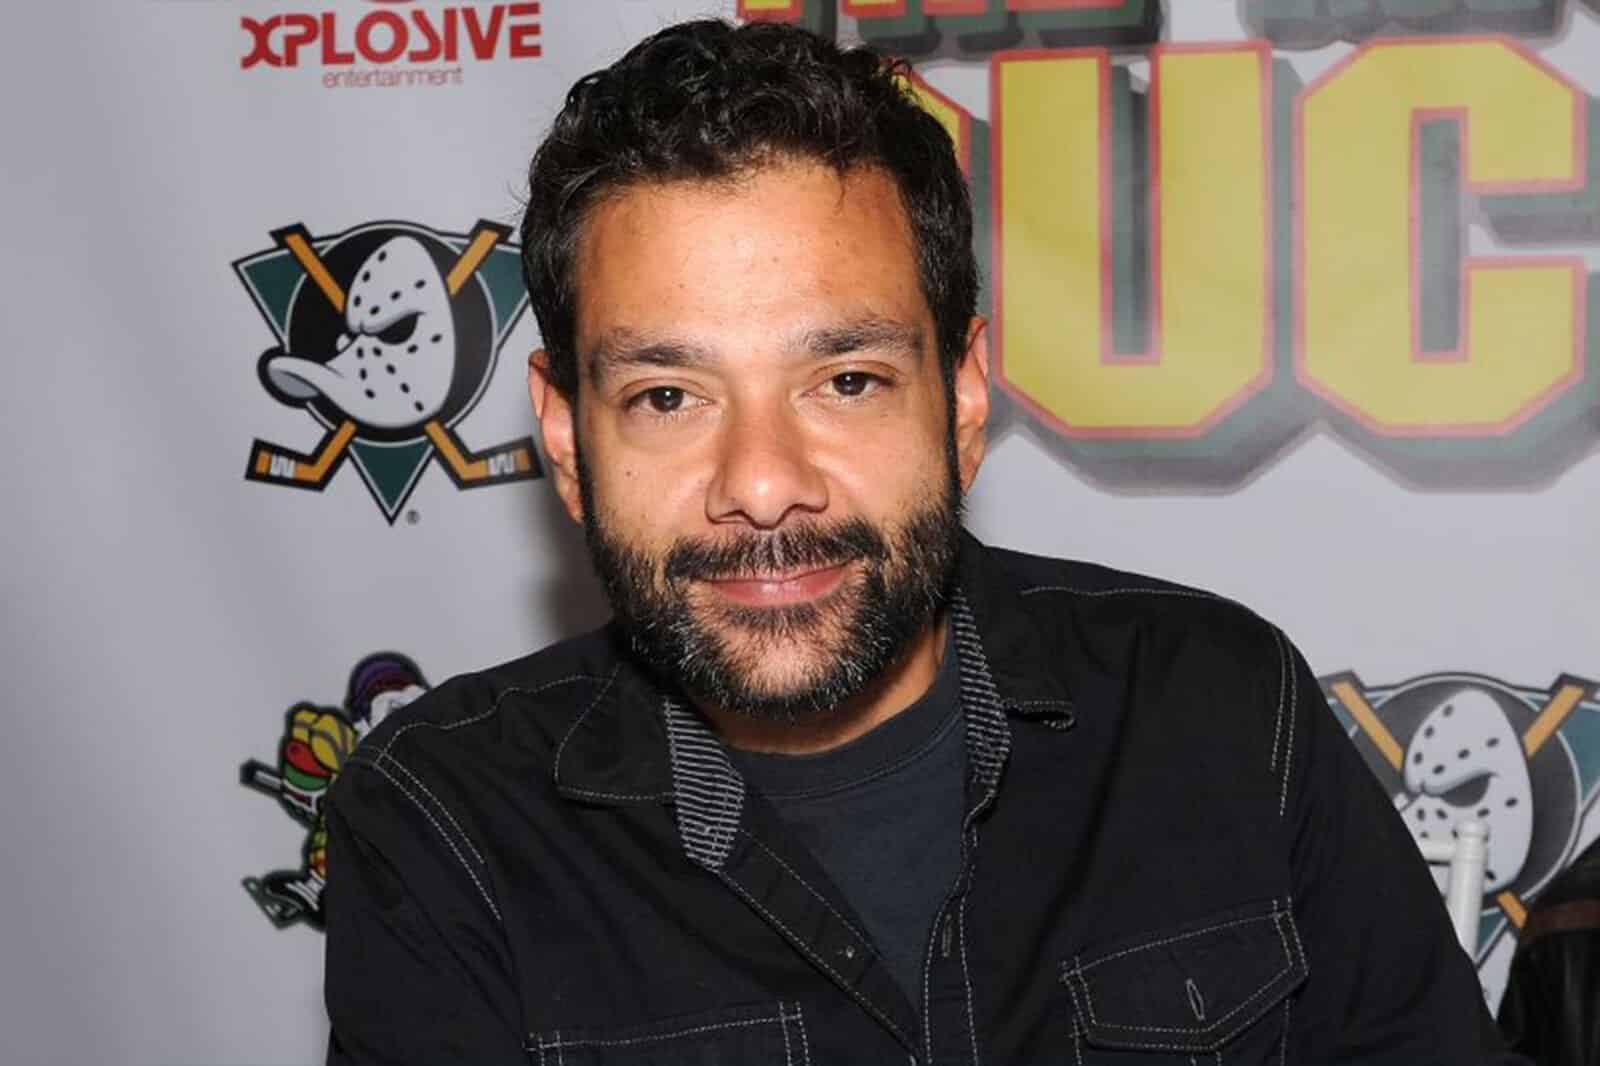 Shaun Weiss, the actor best known for playing Greg Goldberg in The